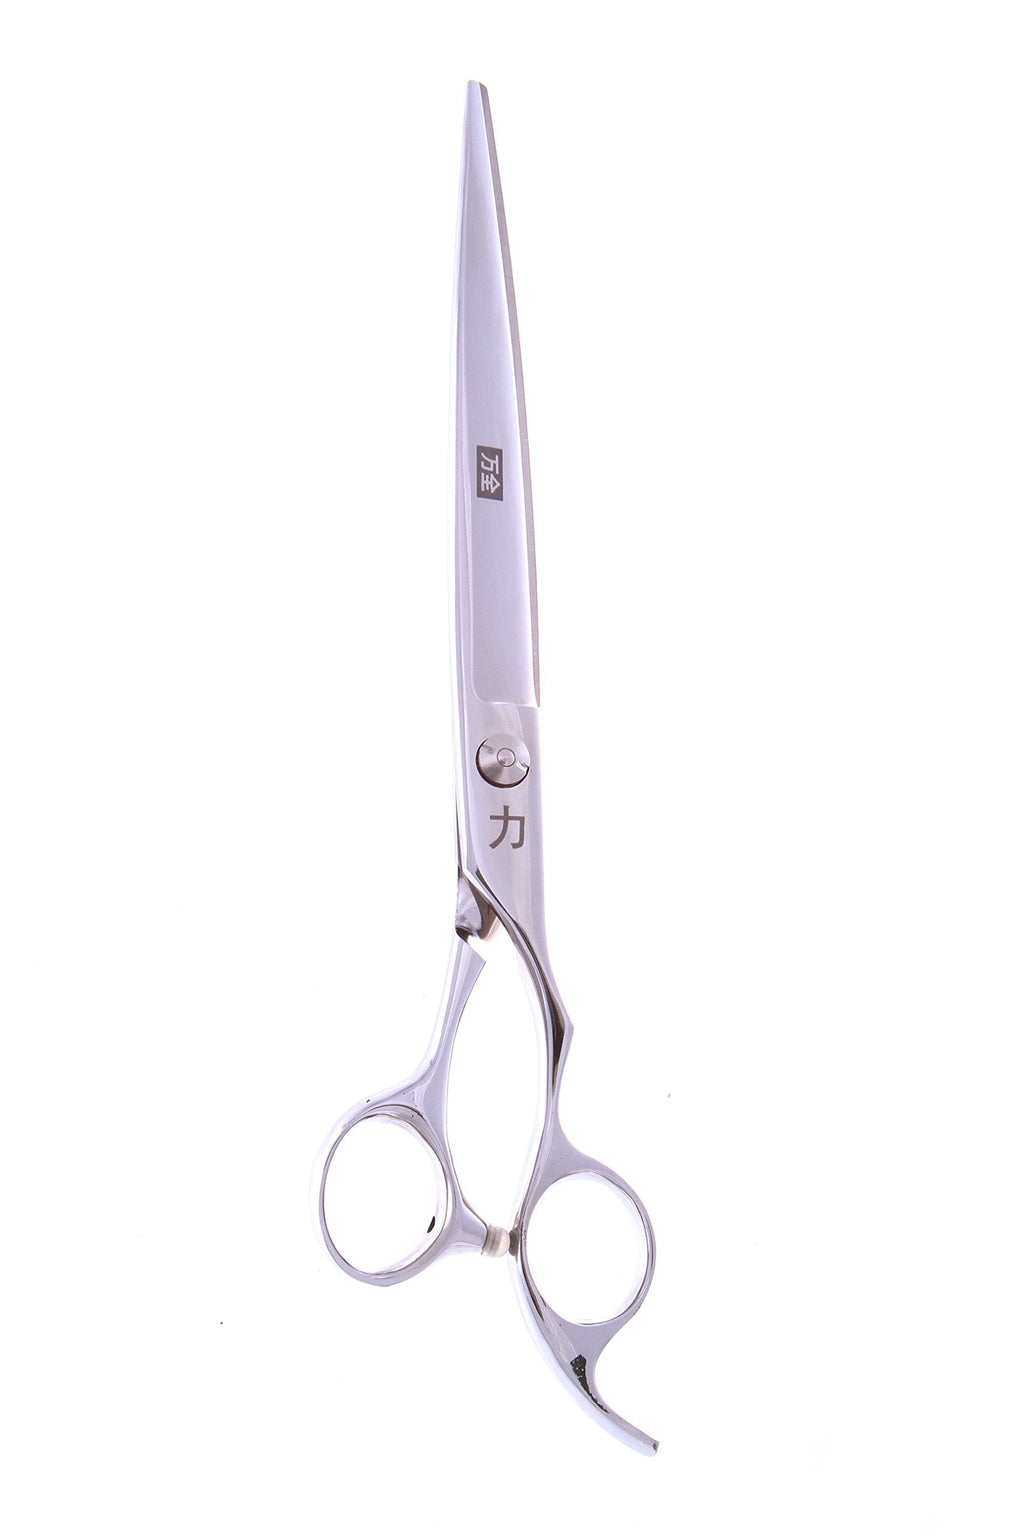 [Australia] - ShearsDirect 8-Inch Professional Ergonomic Grooming Shear with Off-Set Handle and Fixed Finger Rest 